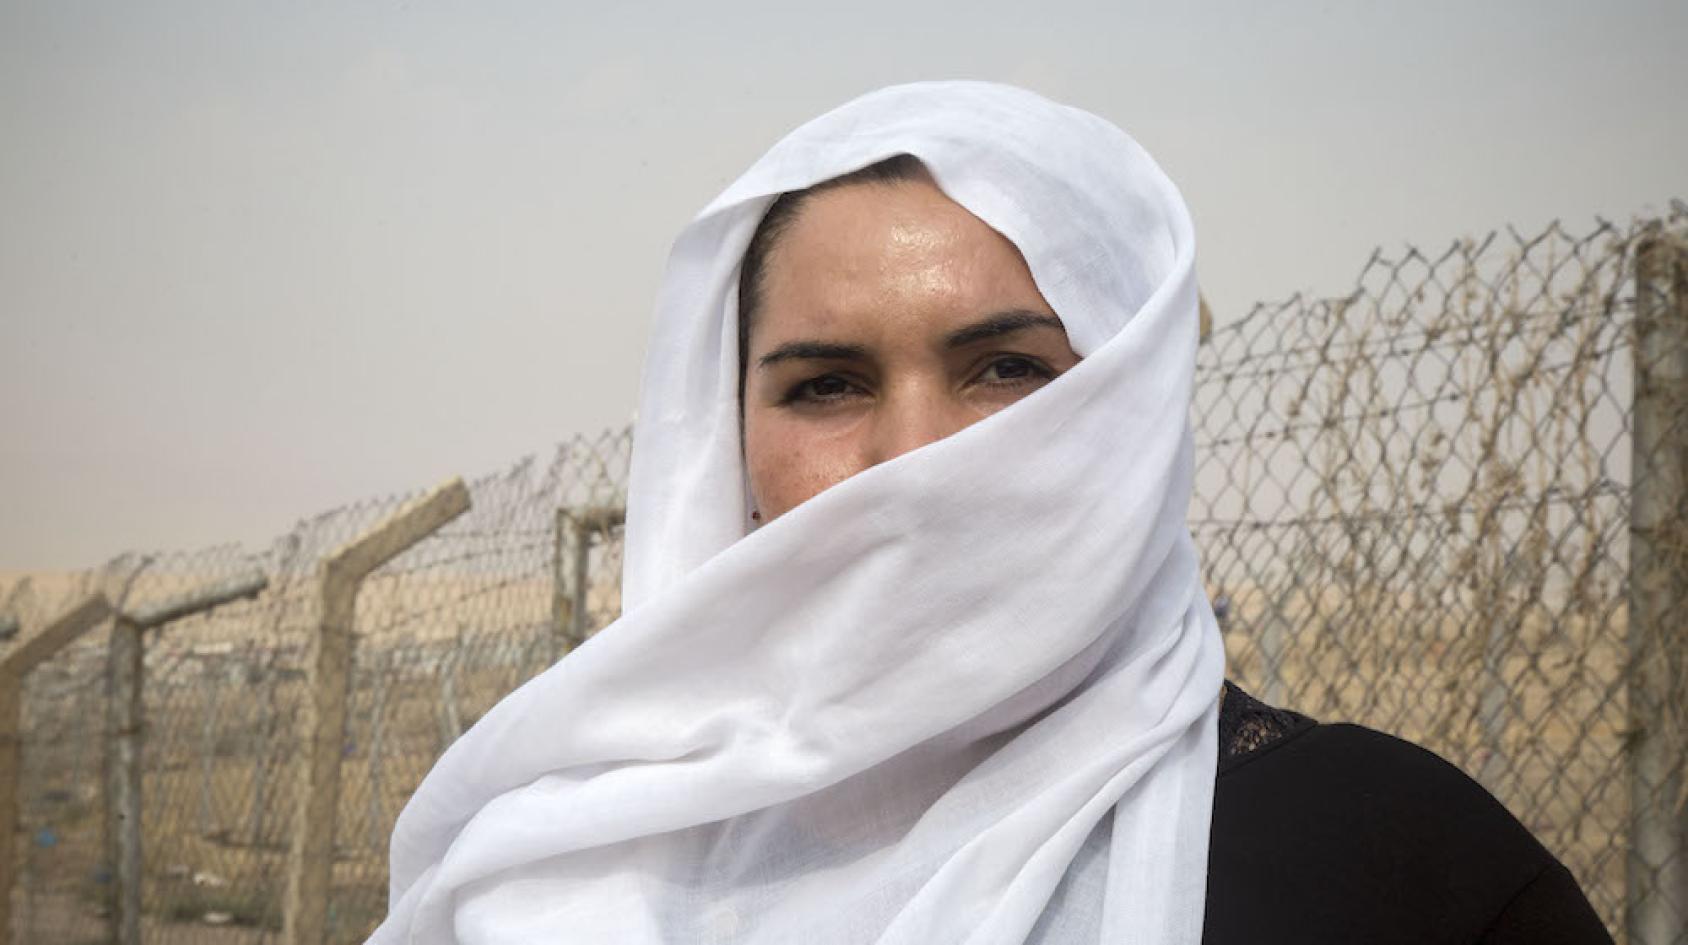 A powerful image of a woman's eyes behind a white scarf near a metal fence. 